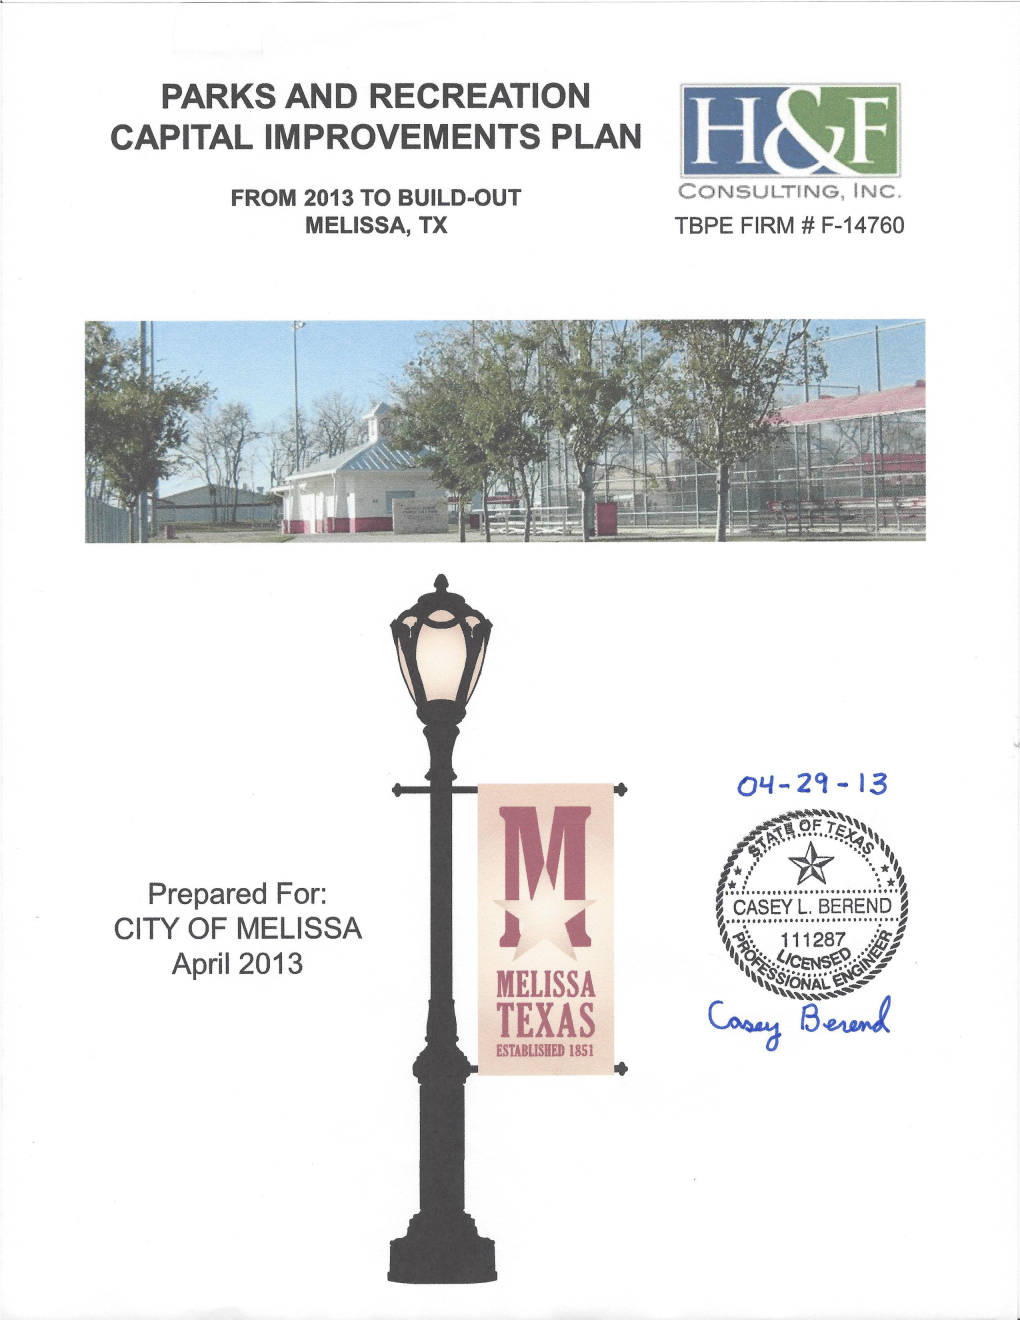 City of Melissa Parks and Recreation Capital Improvements Plan